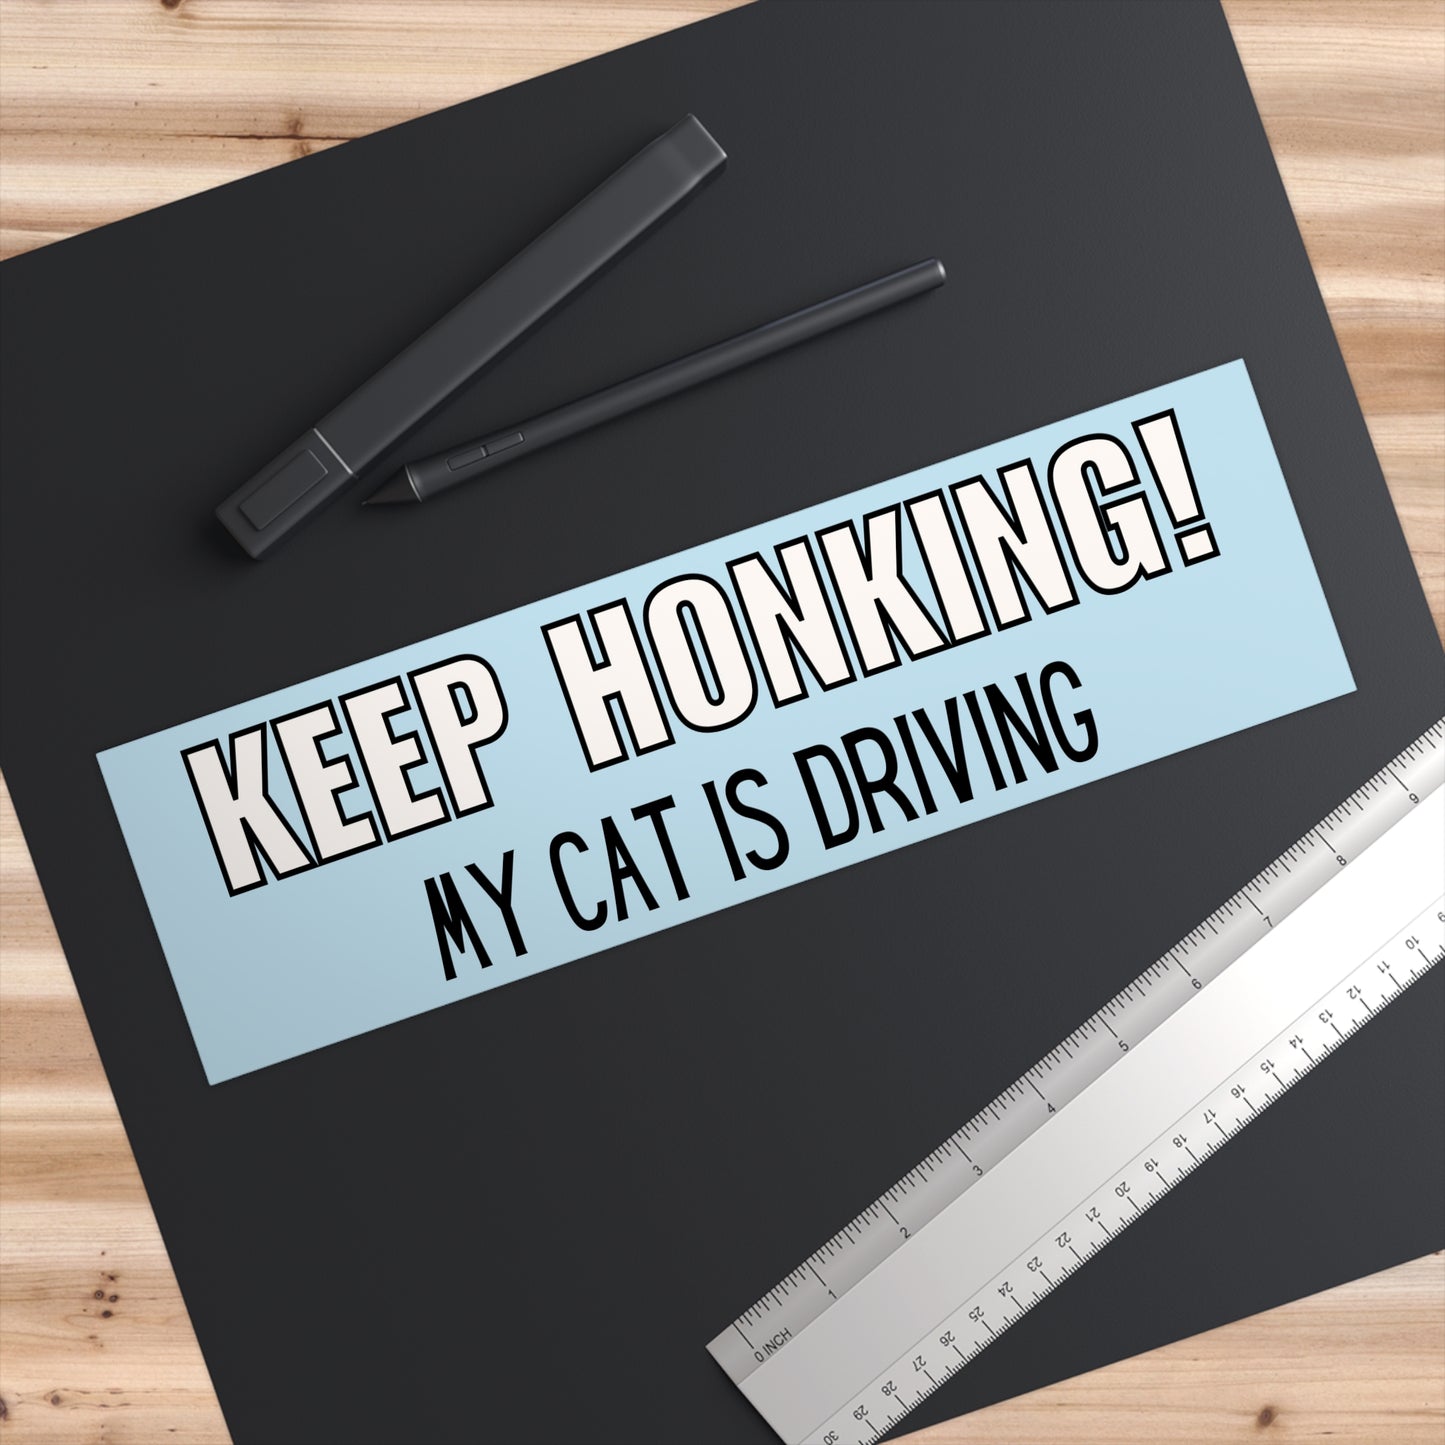 "Keep Honking! My cat is driving" Bumper Sticker